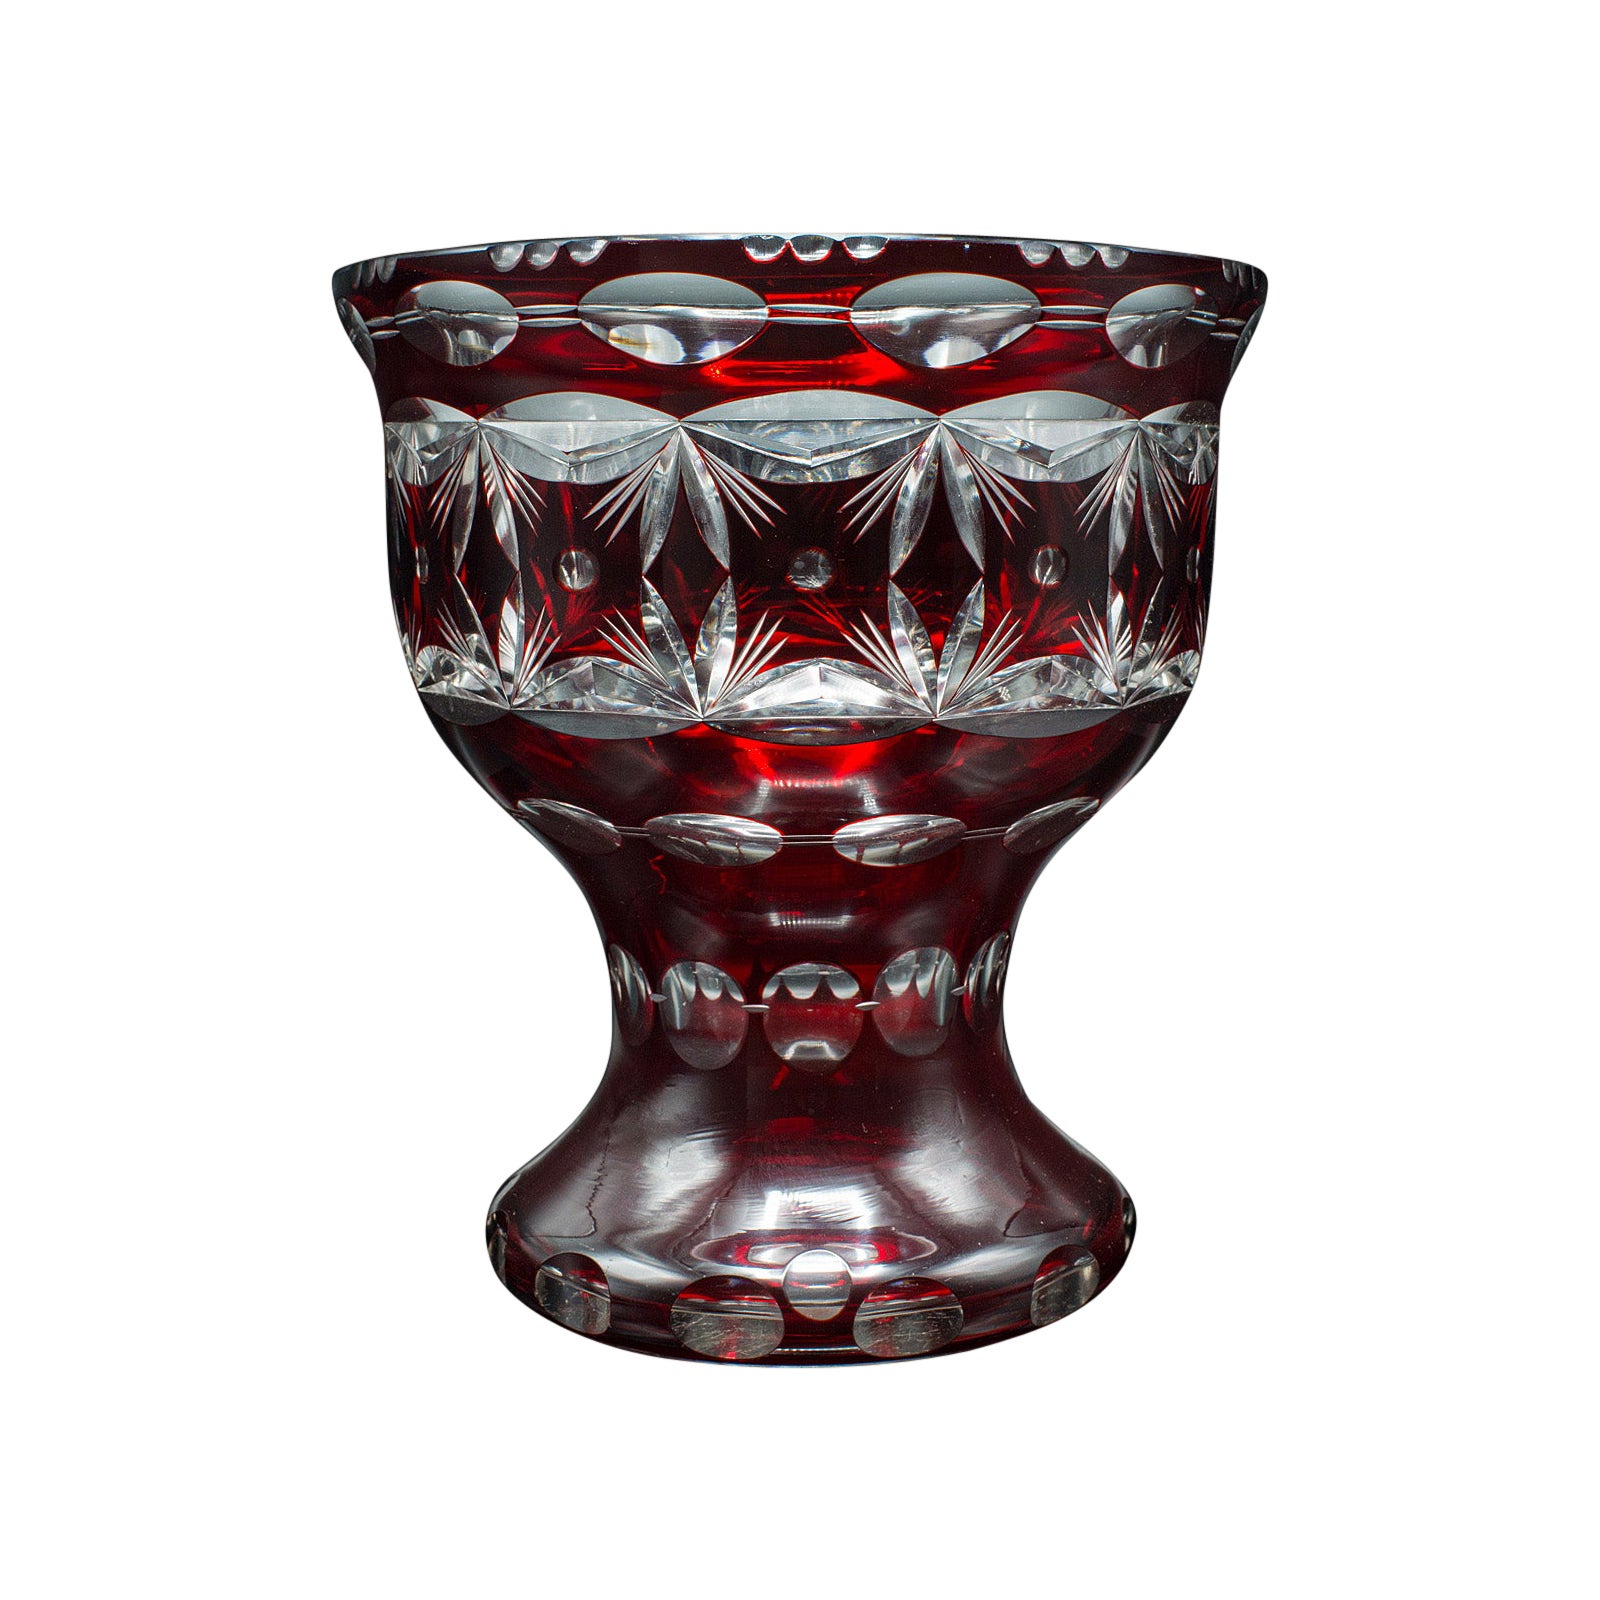 Antique Pedestal Bowl, Continental, Red Glass, Decorative Ice Bucket, Circa 1920 For Sale